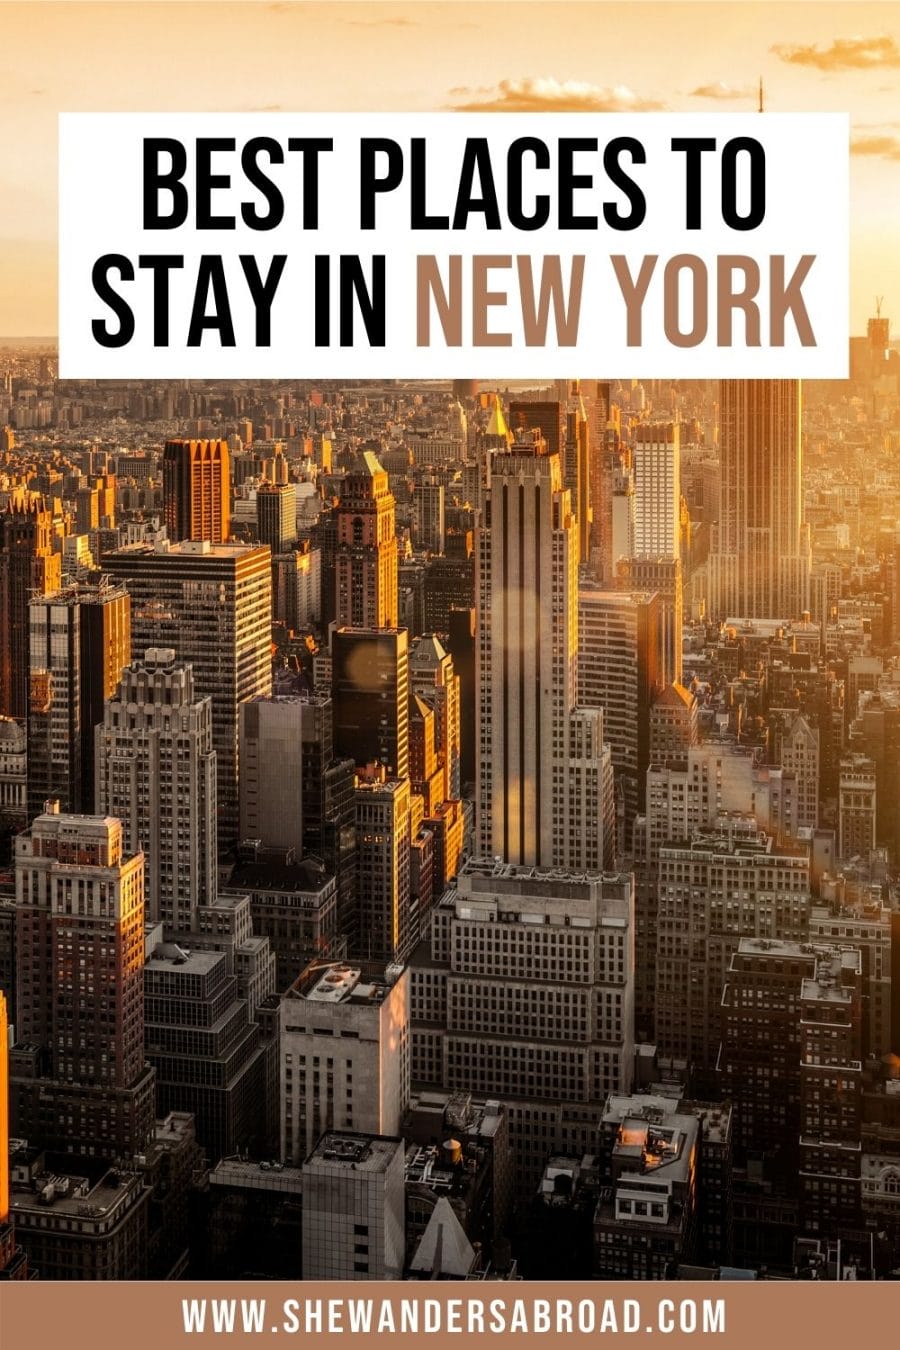 Best areas to stay in New York City